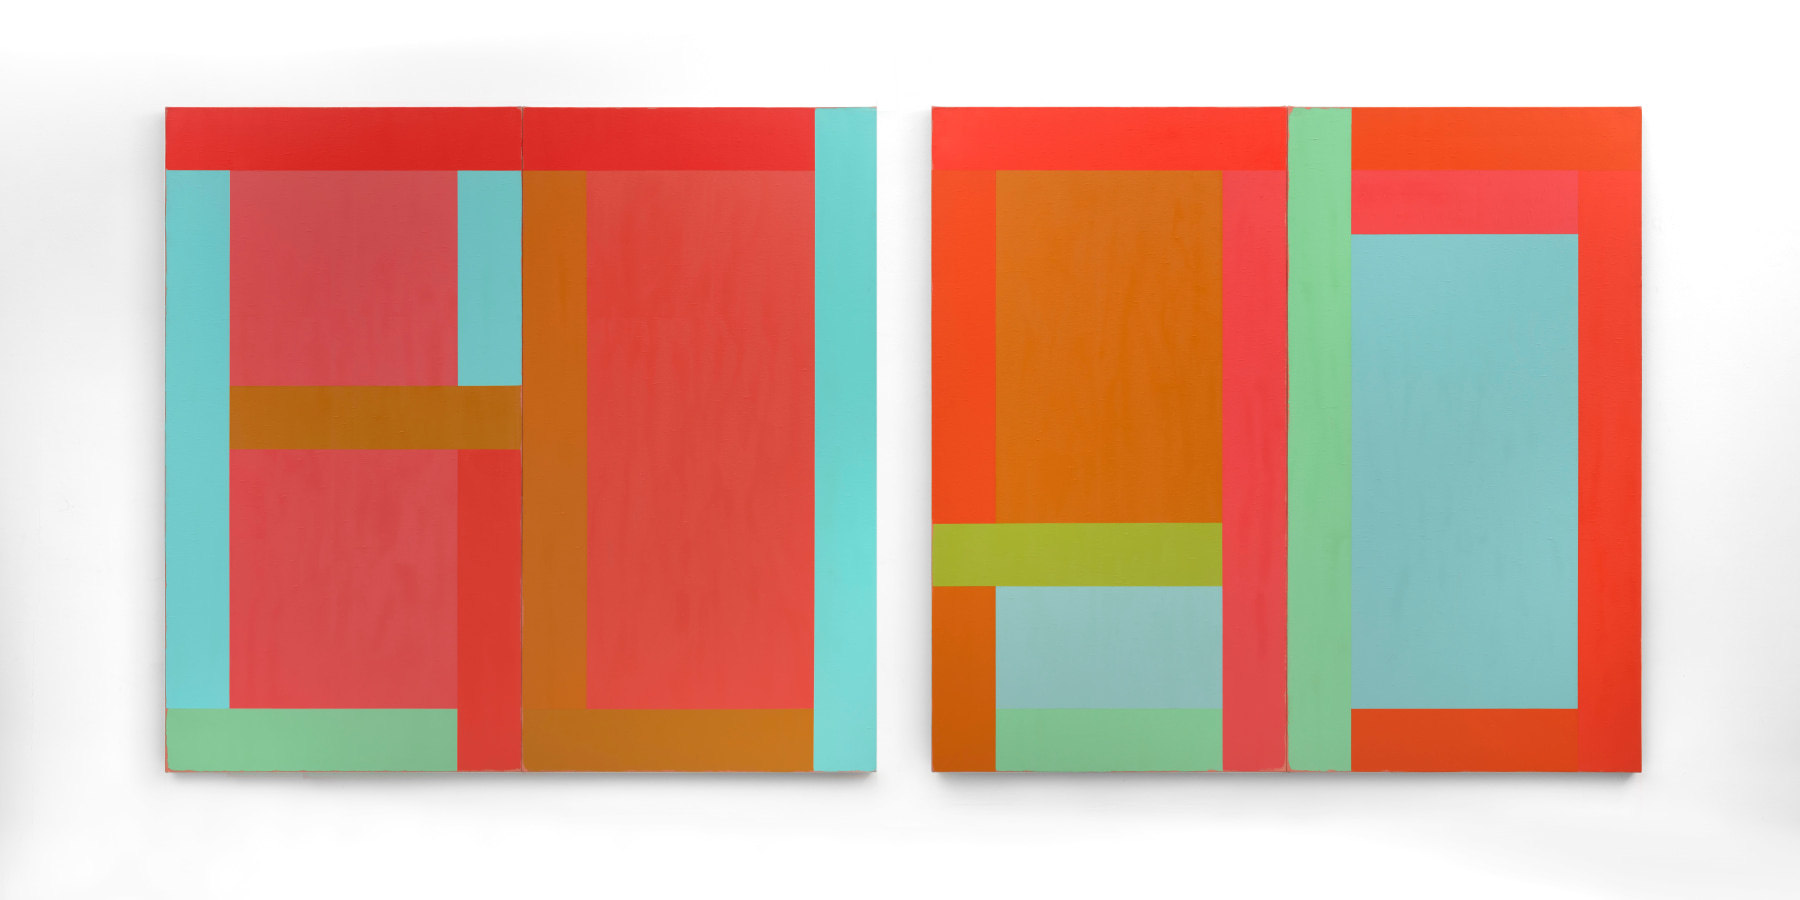 Two by Two, 1980  oil on canvas  68 x 150 inches  172.7 x 381 centimeters  LSFA# 13408